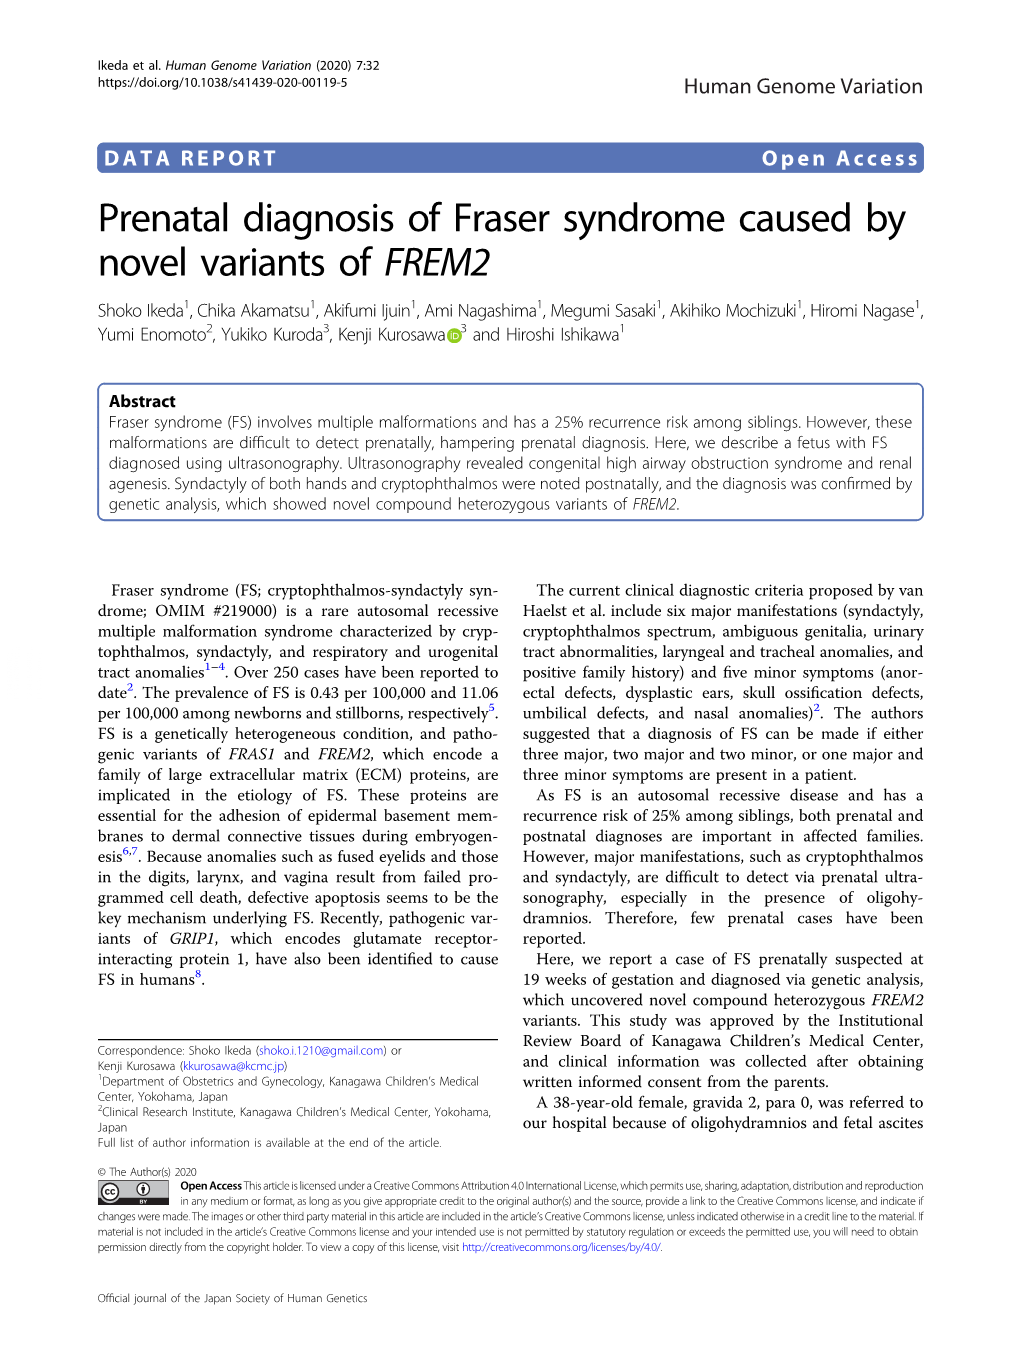 Prenatal Diagnosis of Fraser Syndrome Caused by Novel Variants